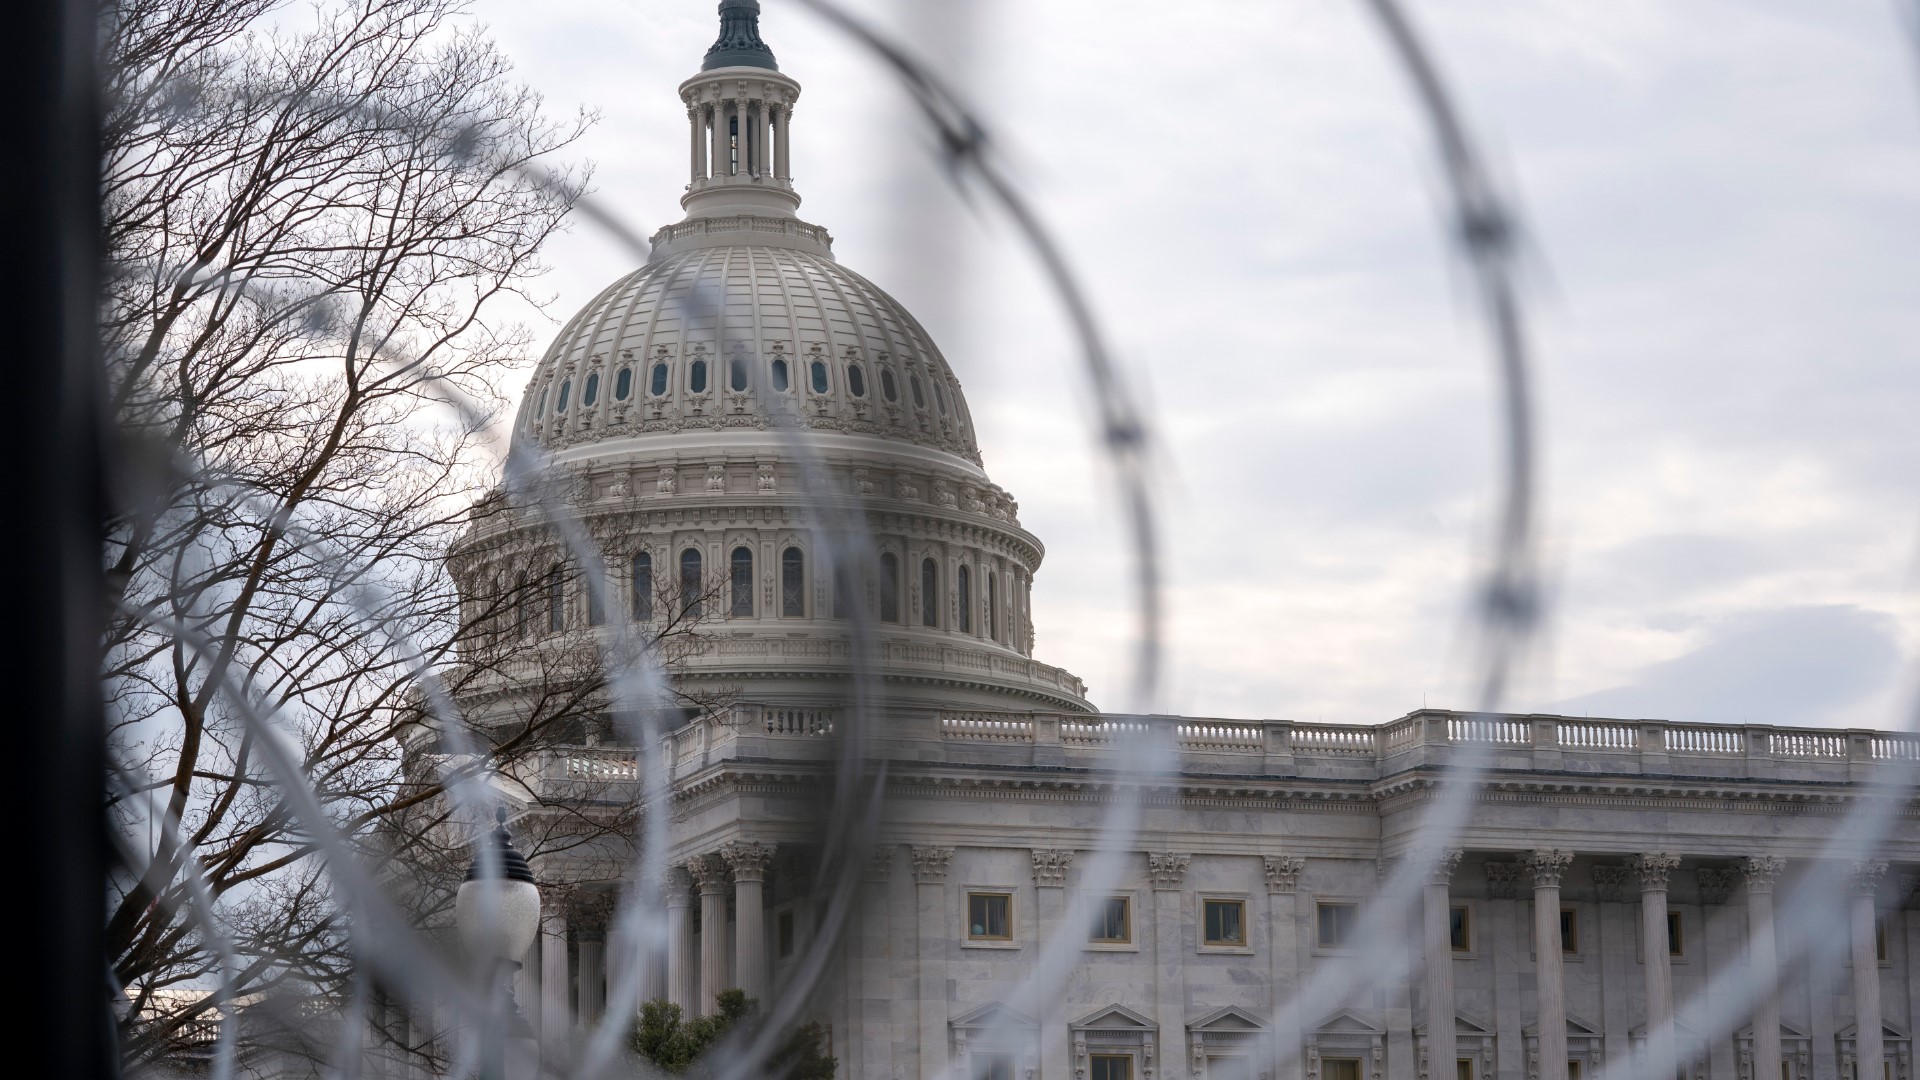 Currently, the Capitol is surrounded by three miles of steel and razor wire fencing that was installed after the Jan. 6 insurrection.